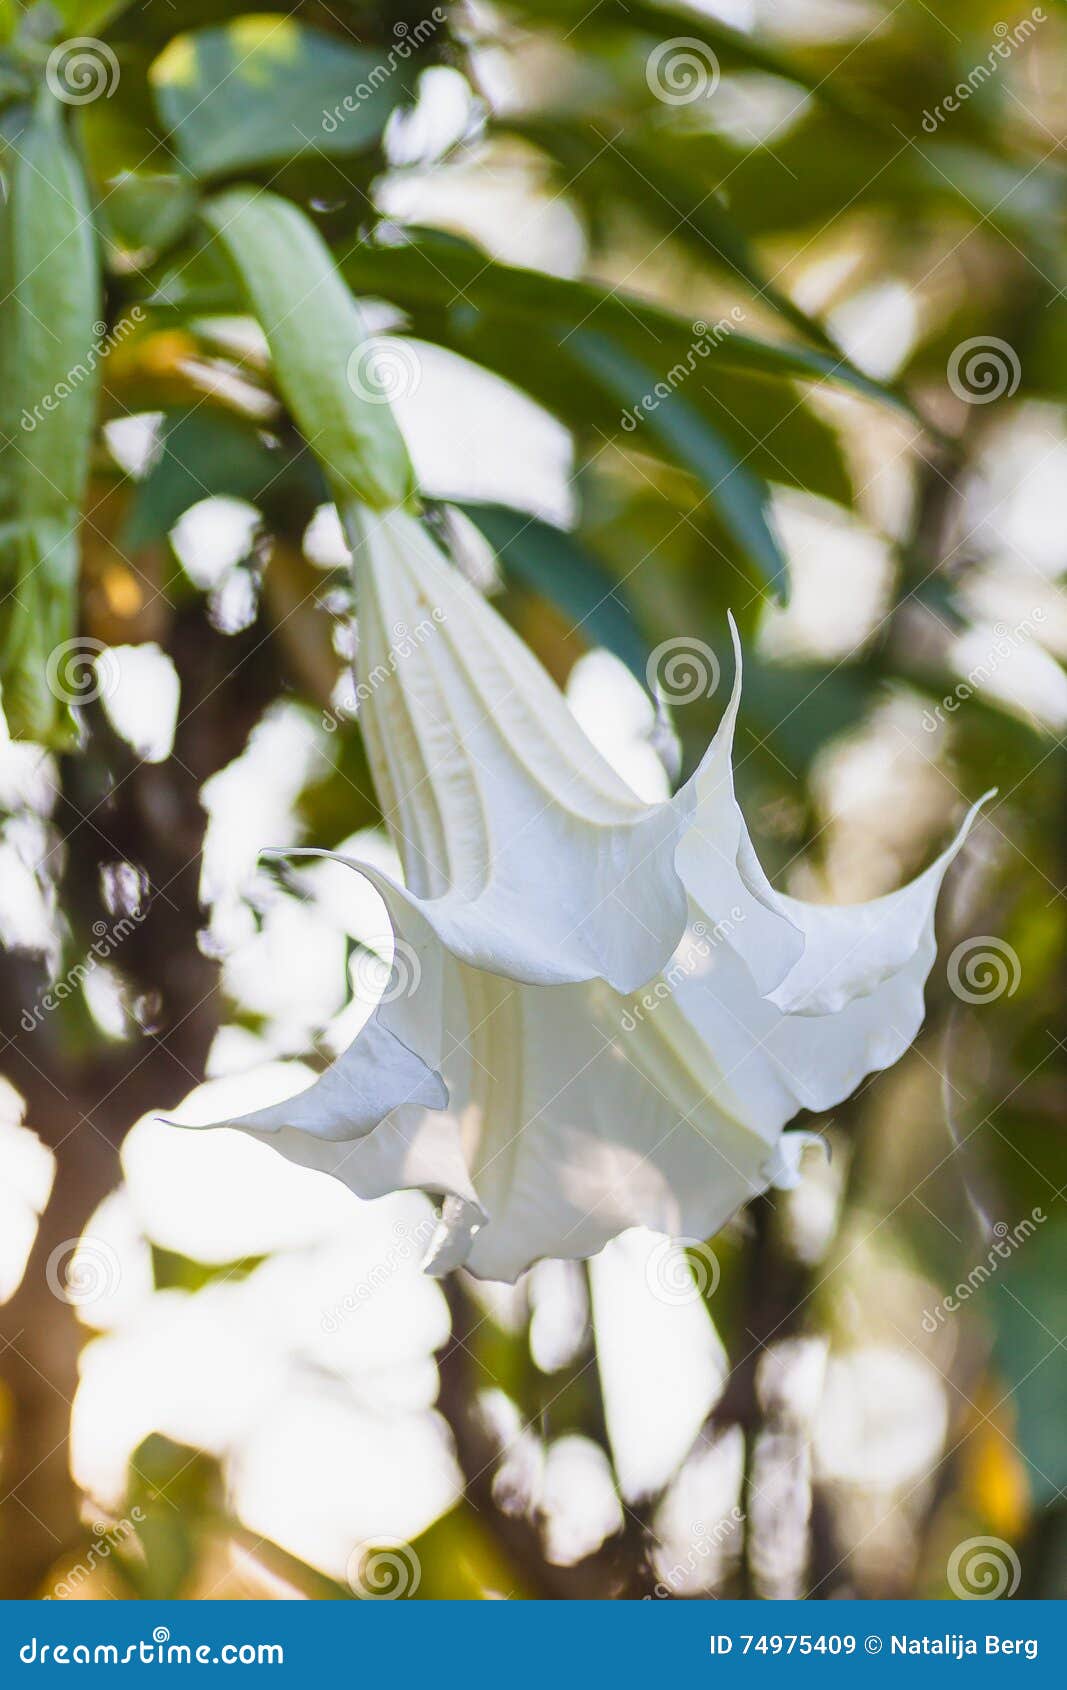 white datura also known as devils trumpets